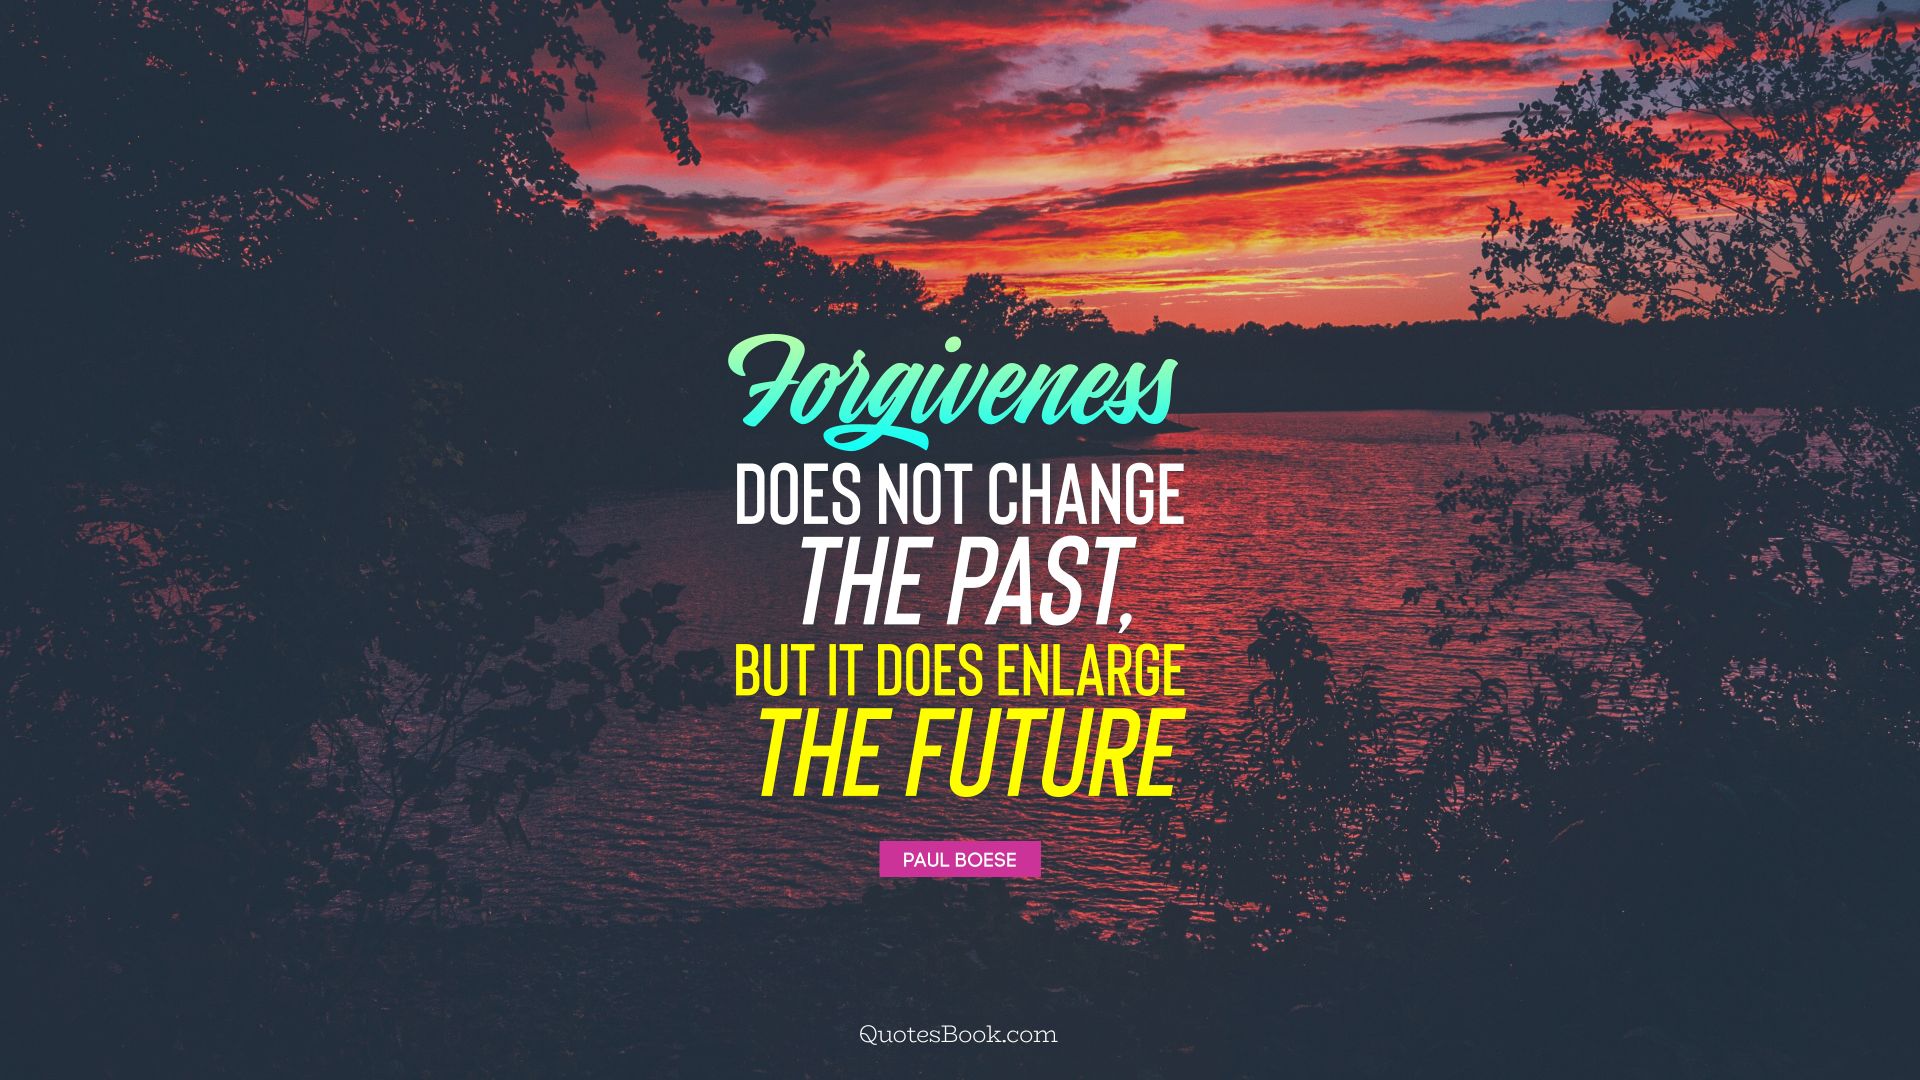 Forgiveness does not change the past, but it does enlarge the future. - Quote by Paul Boese